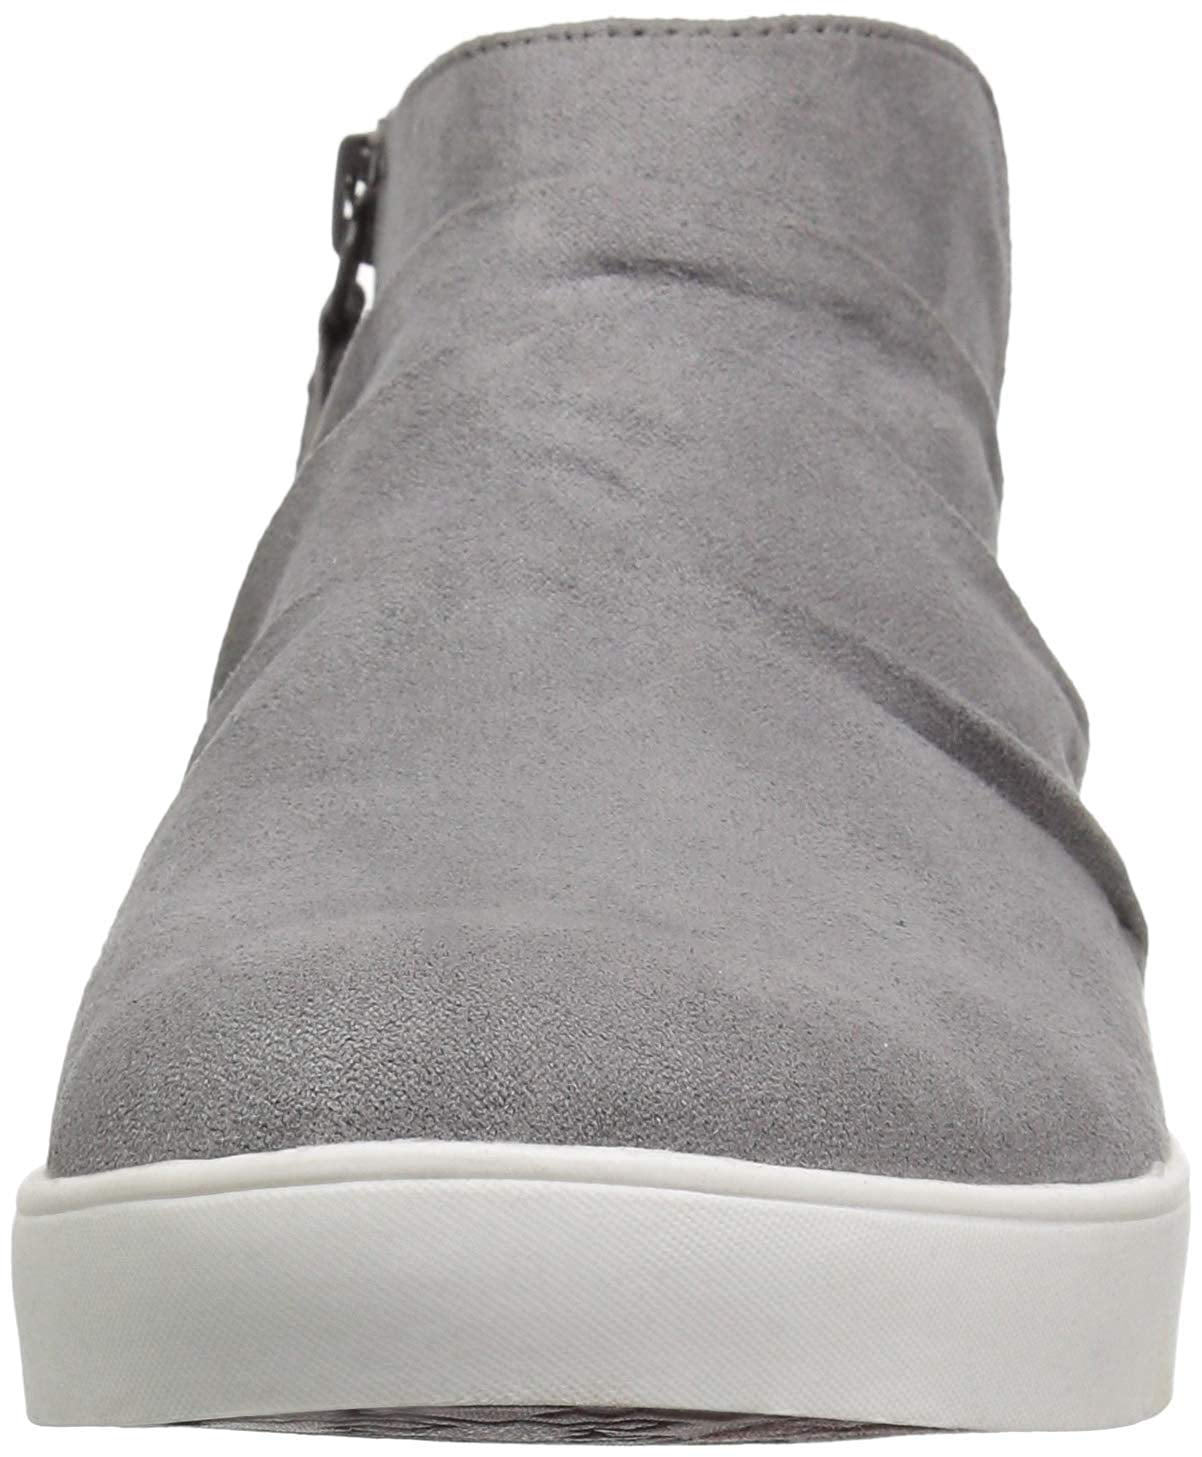 Madi Bootie Ankle Boot, Grey, Size 